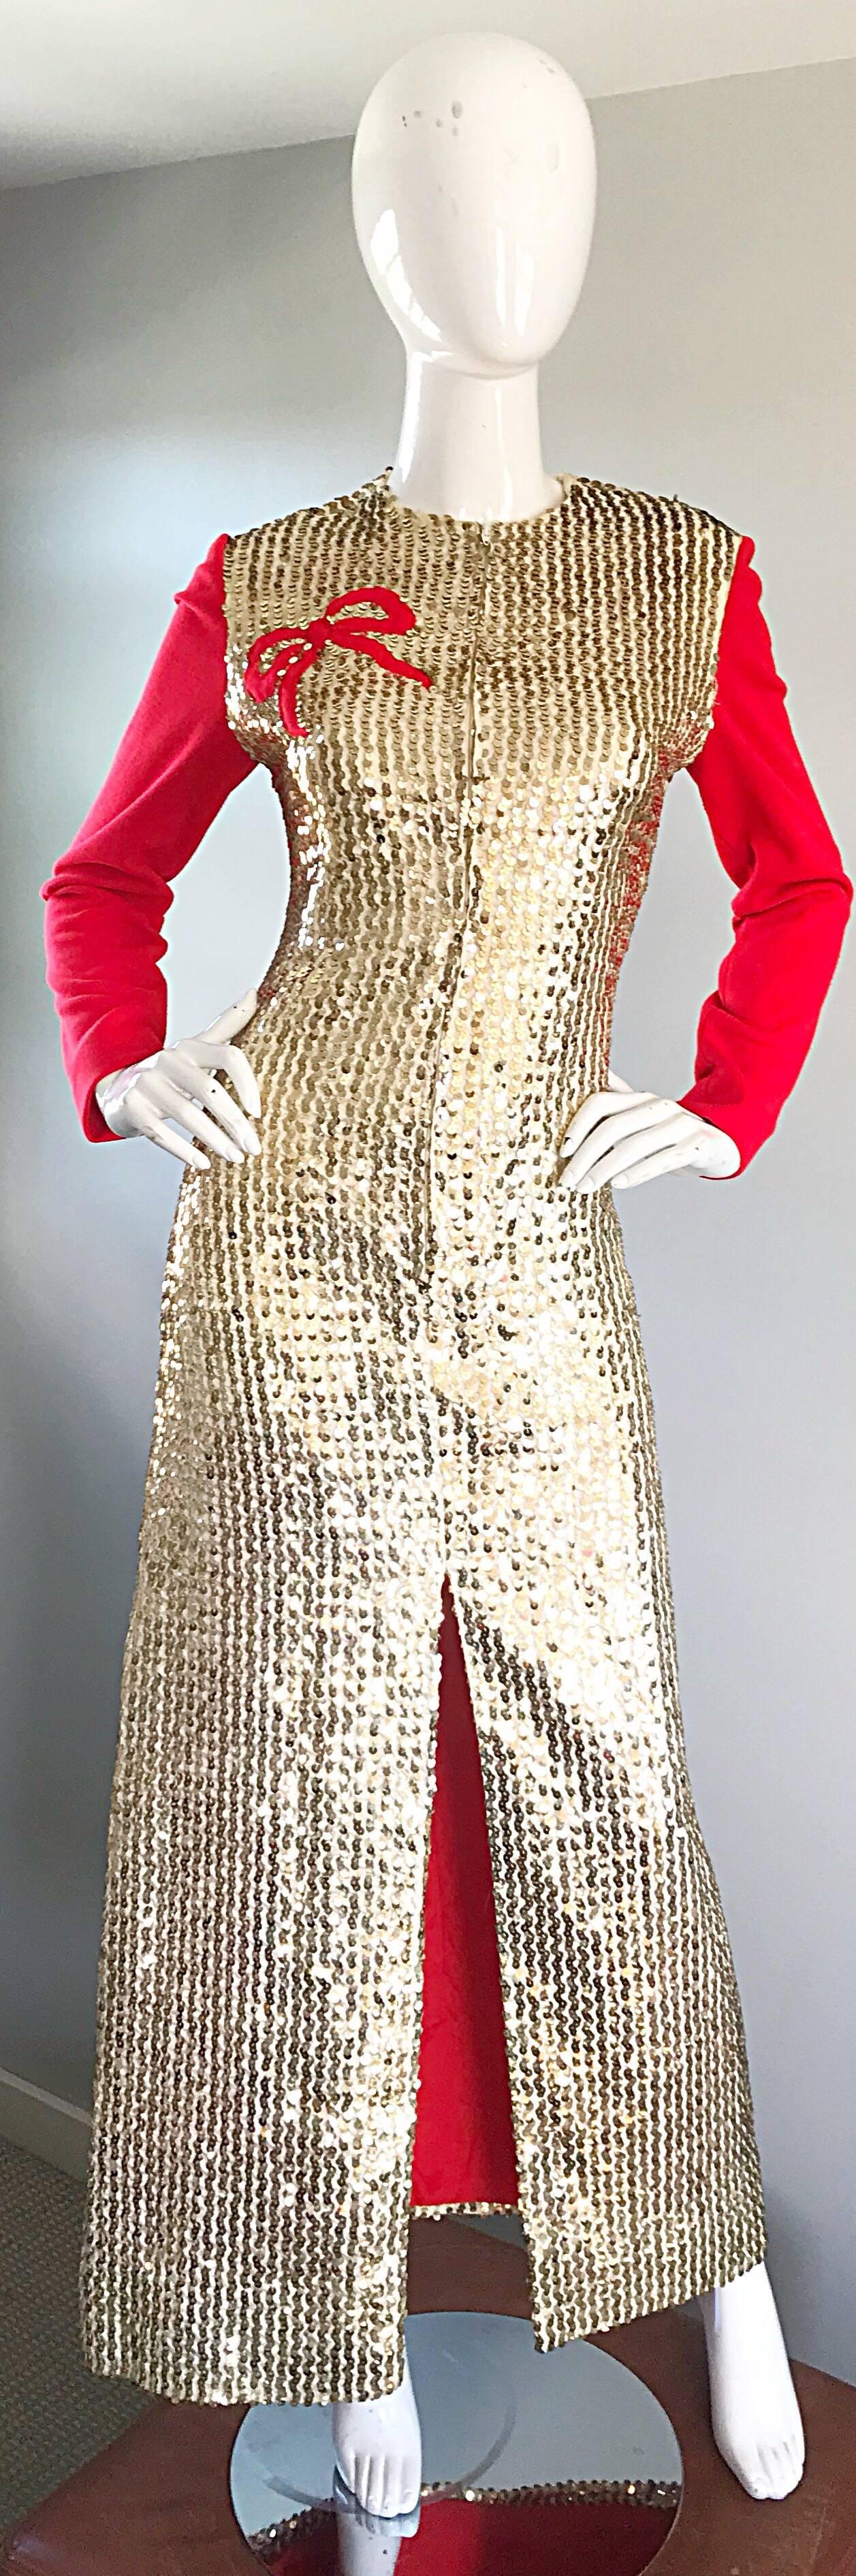 Incredible, and super rare mid 60s one of a kind OSCAR DE LA RENTA gold and red sequin long sleeve gown! Features thousands of hand-sewn gold sequins thorughout. Embroidered red ribbon at right breast. Soft red virgin wool long sleeves. Fully lined.